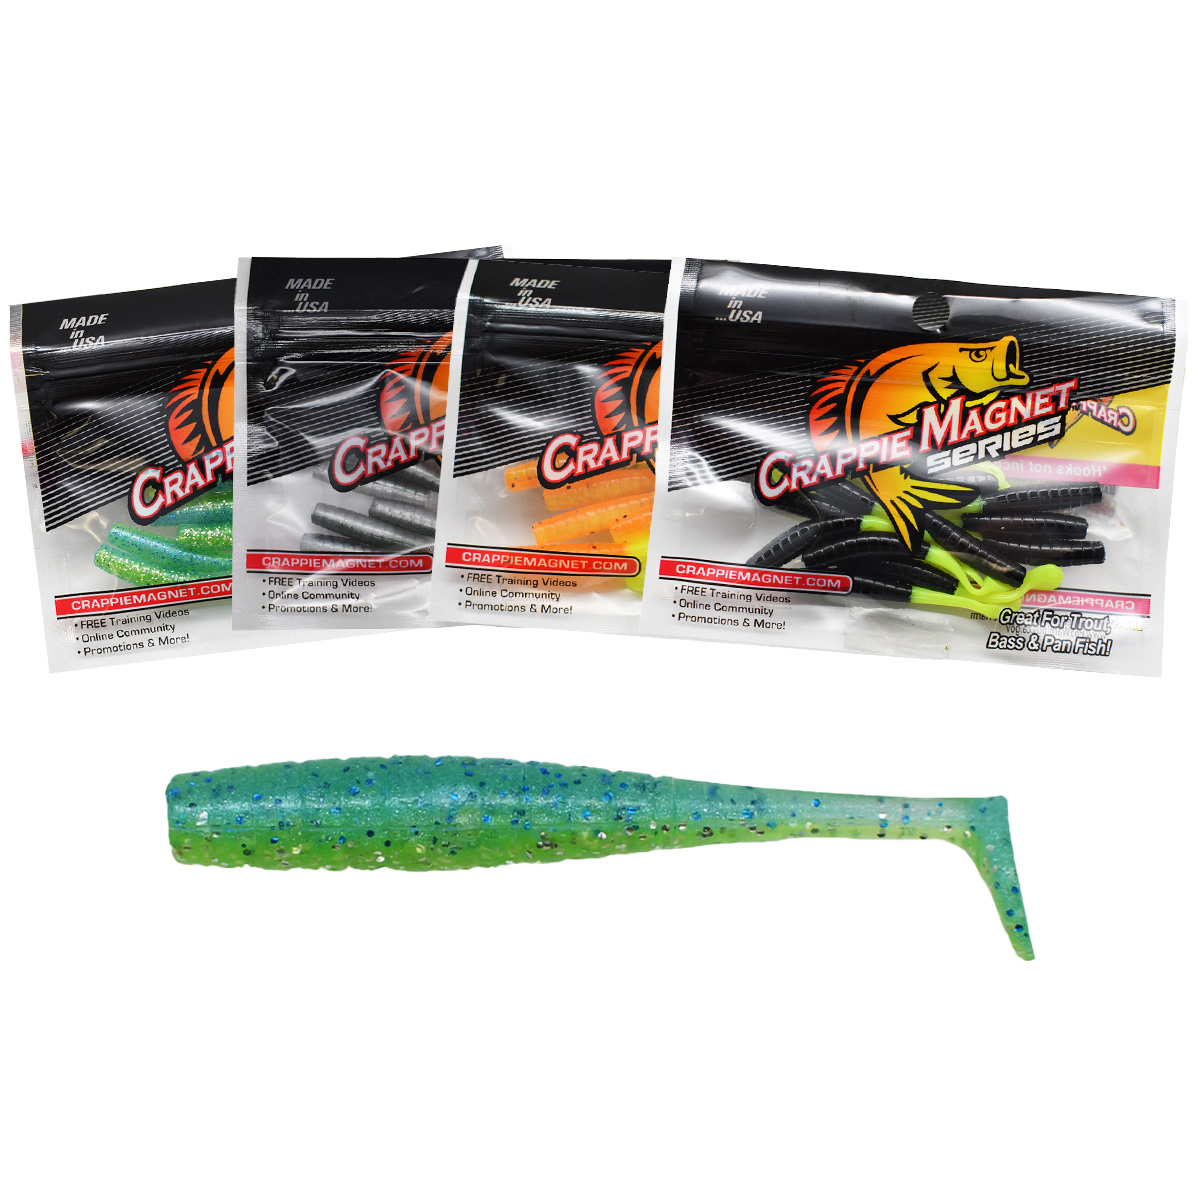 Leland's Lures Crappie Magnet Double Cross Jigs